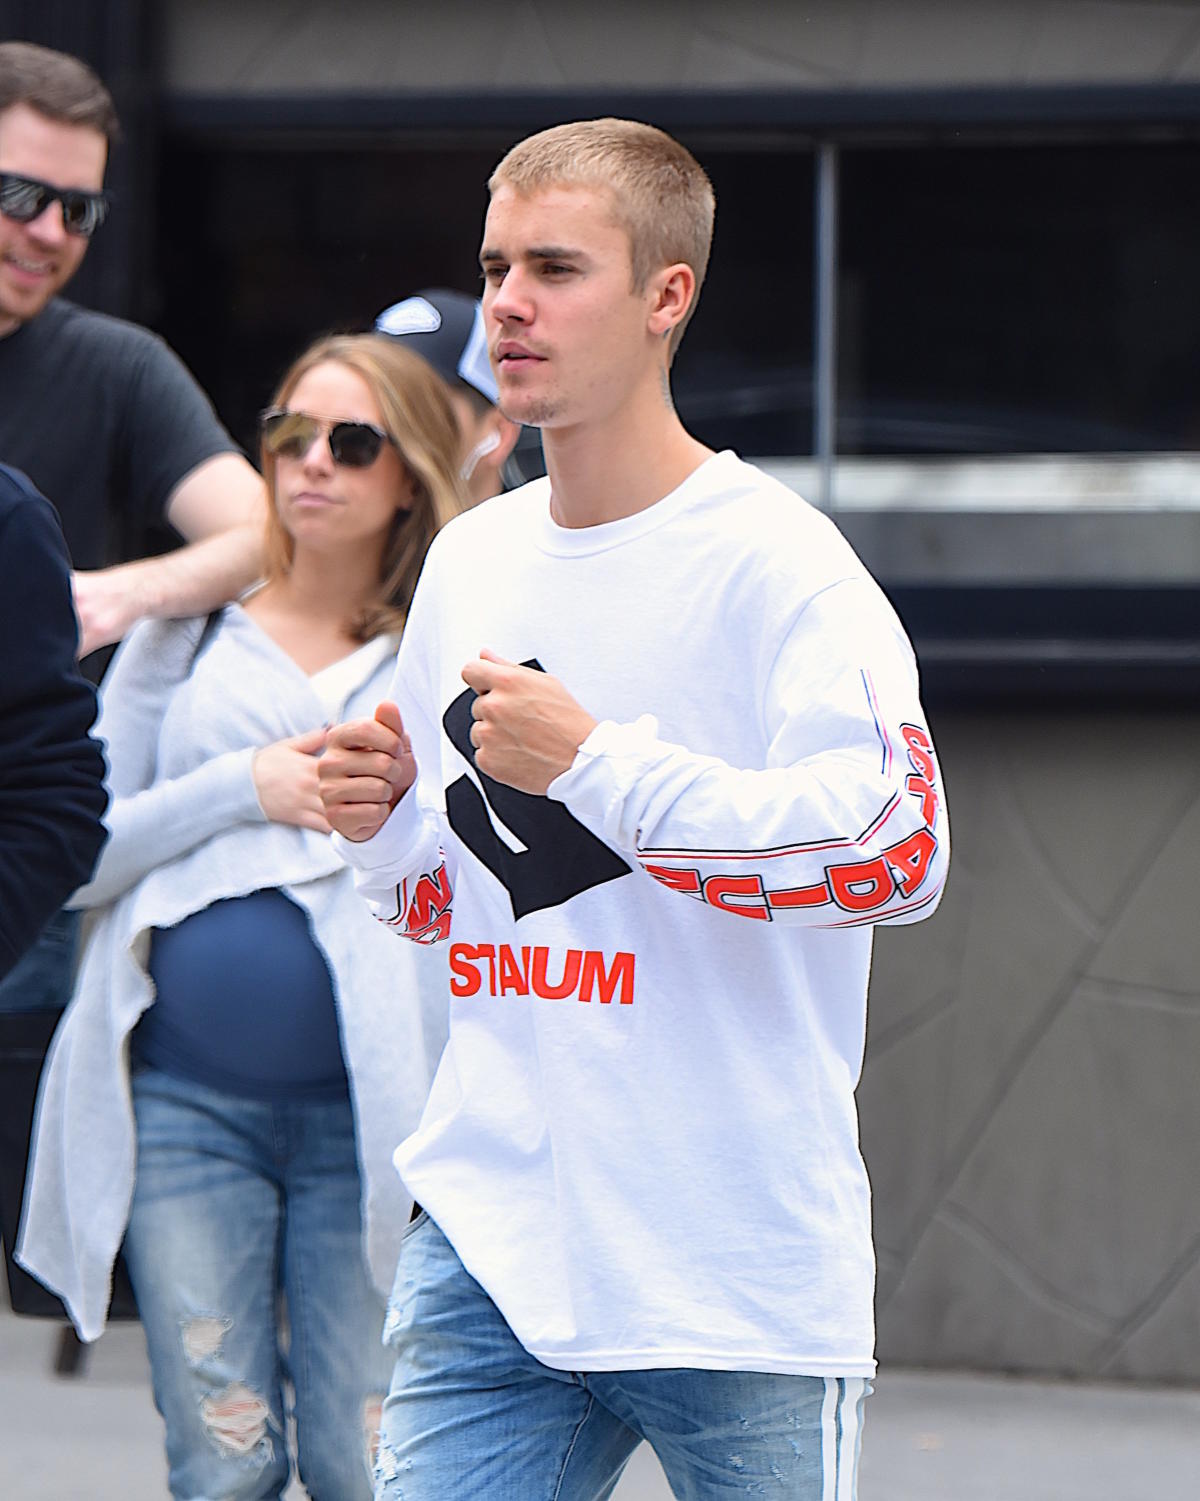 So, why was Justin Bieber wearing that No. 4 Cowboys jersey?